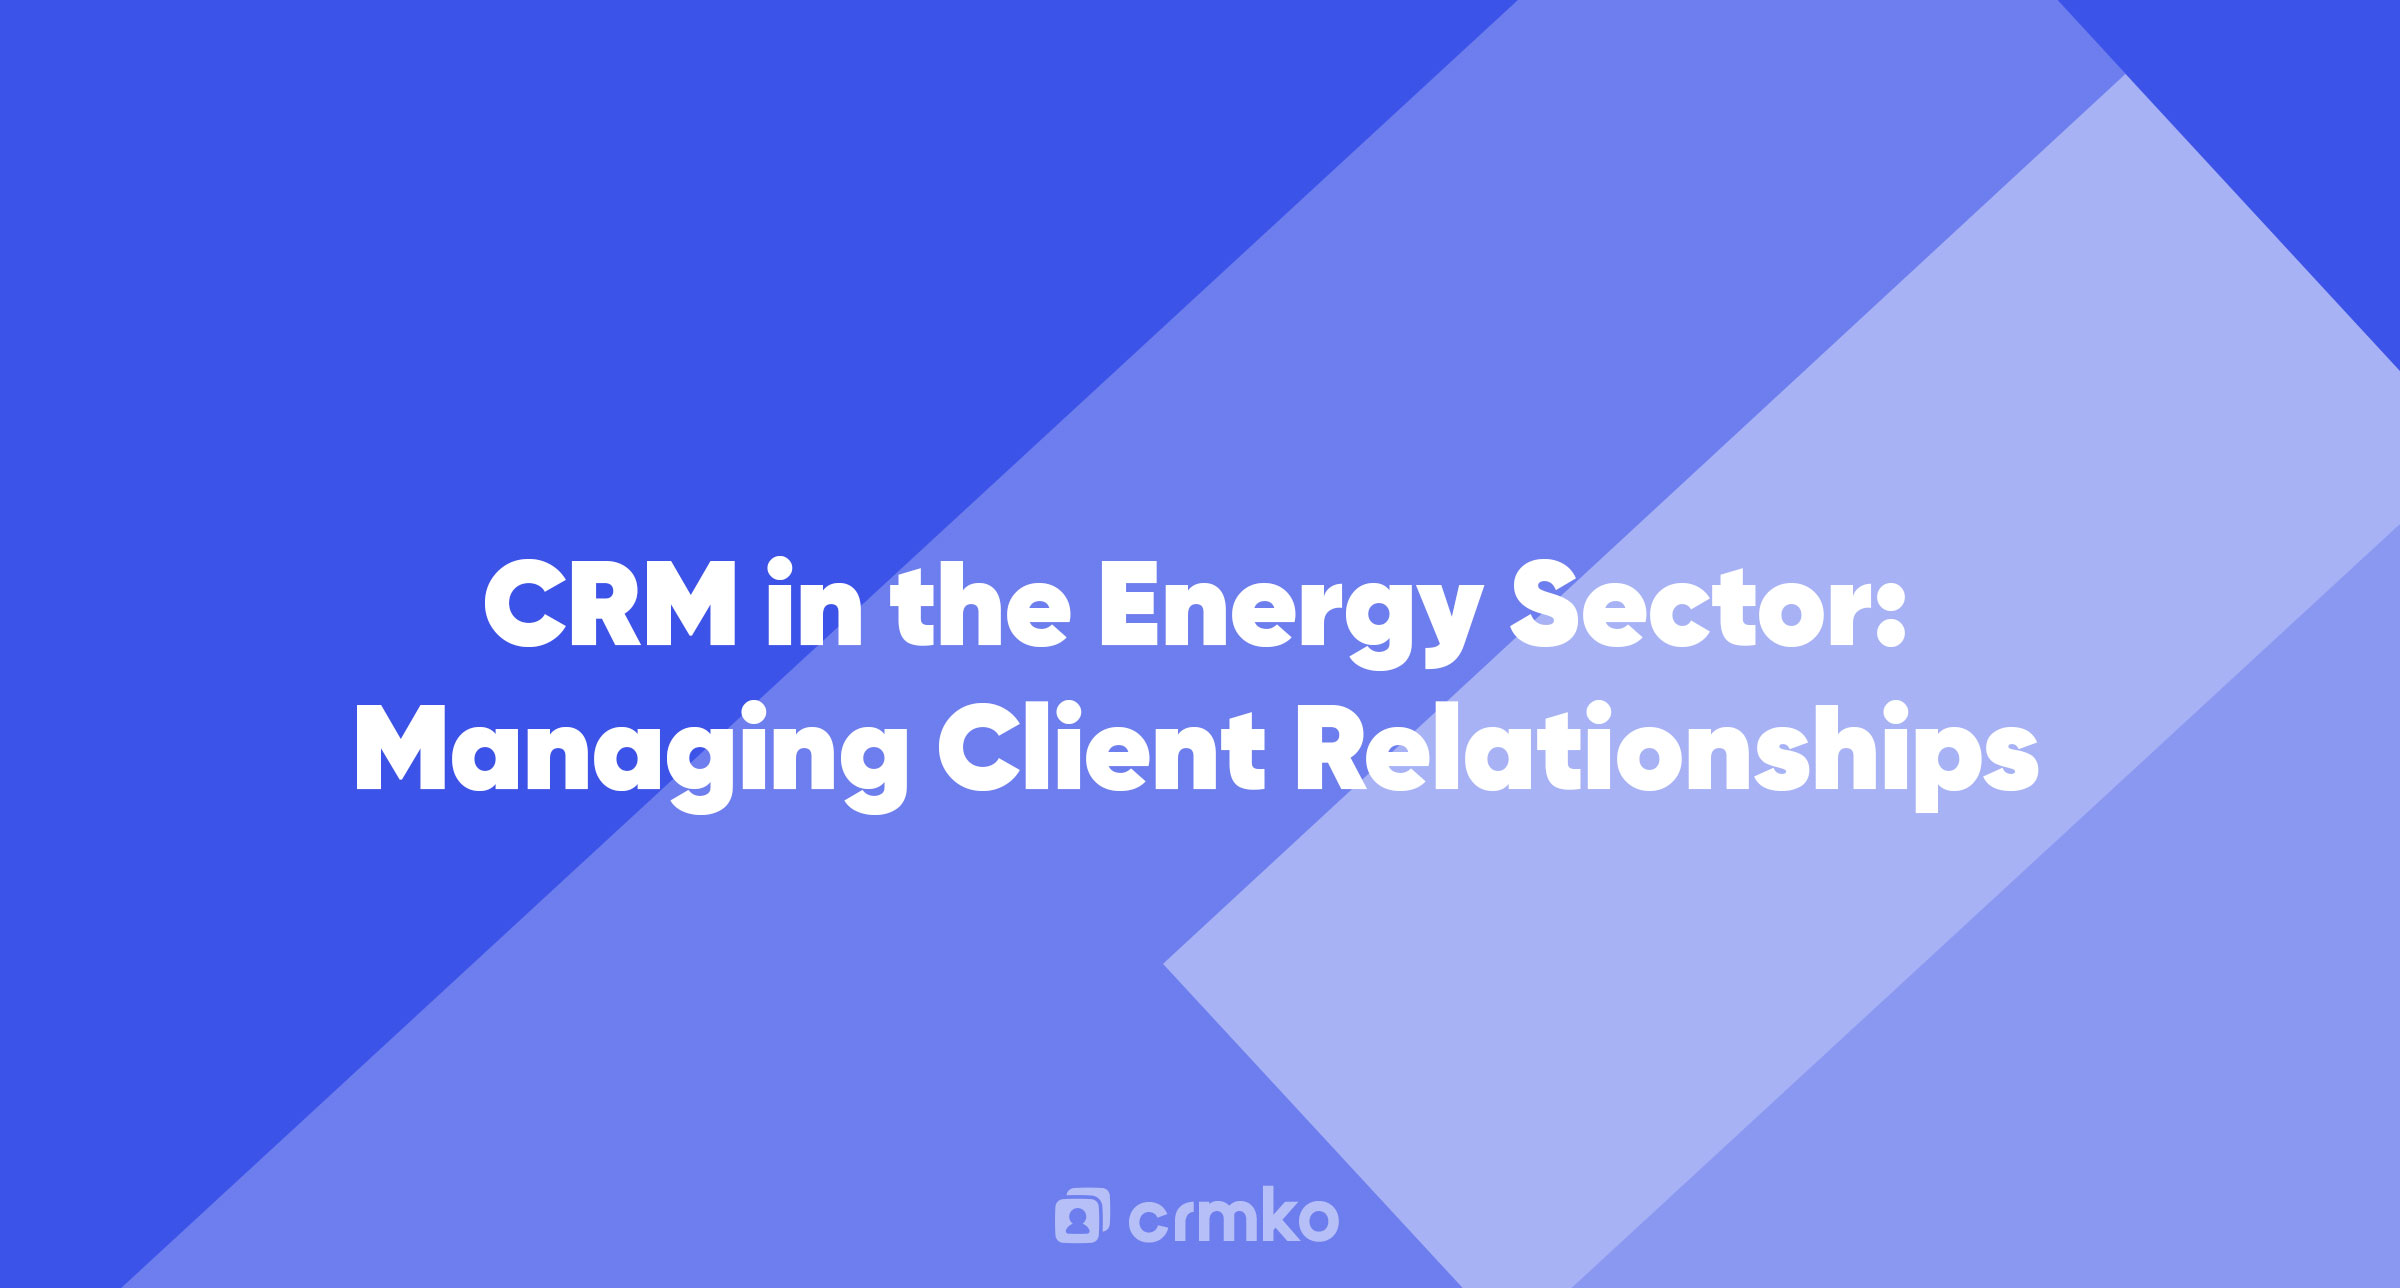 Article | CRM in the Energy Sector: Managing Client Relationships